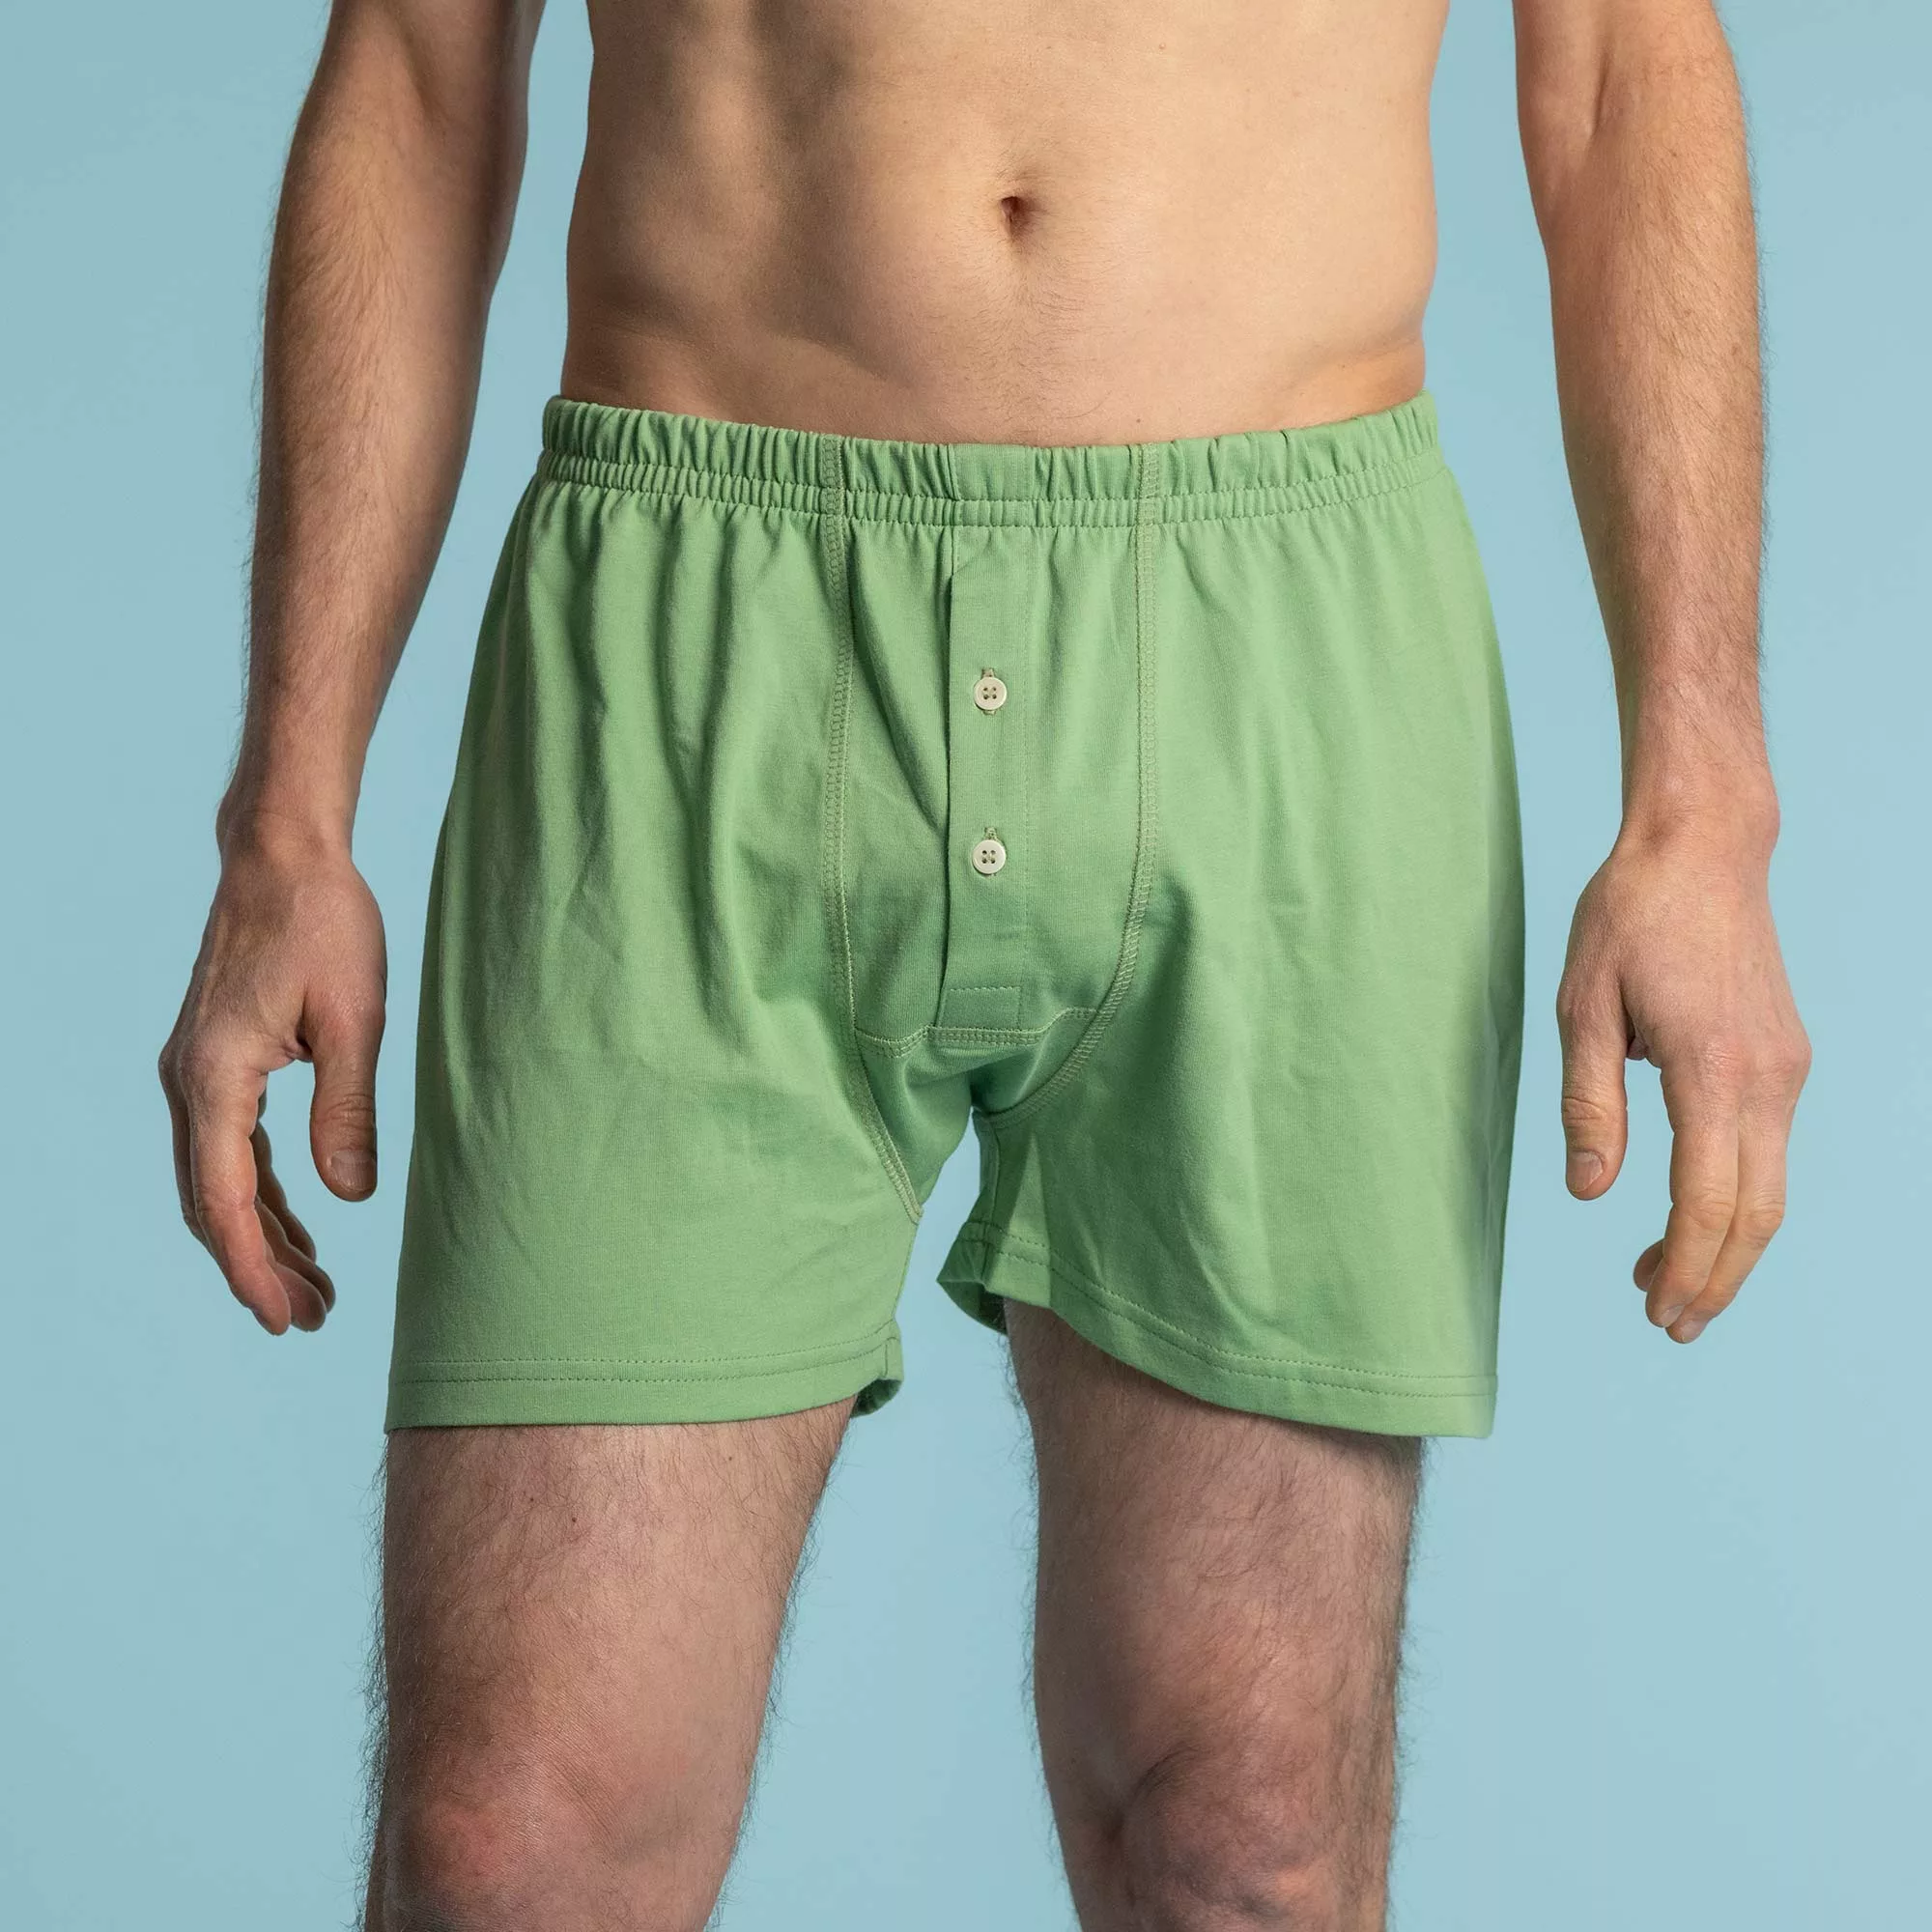 Hemp underwear that's good for the body and the planet - Springwise